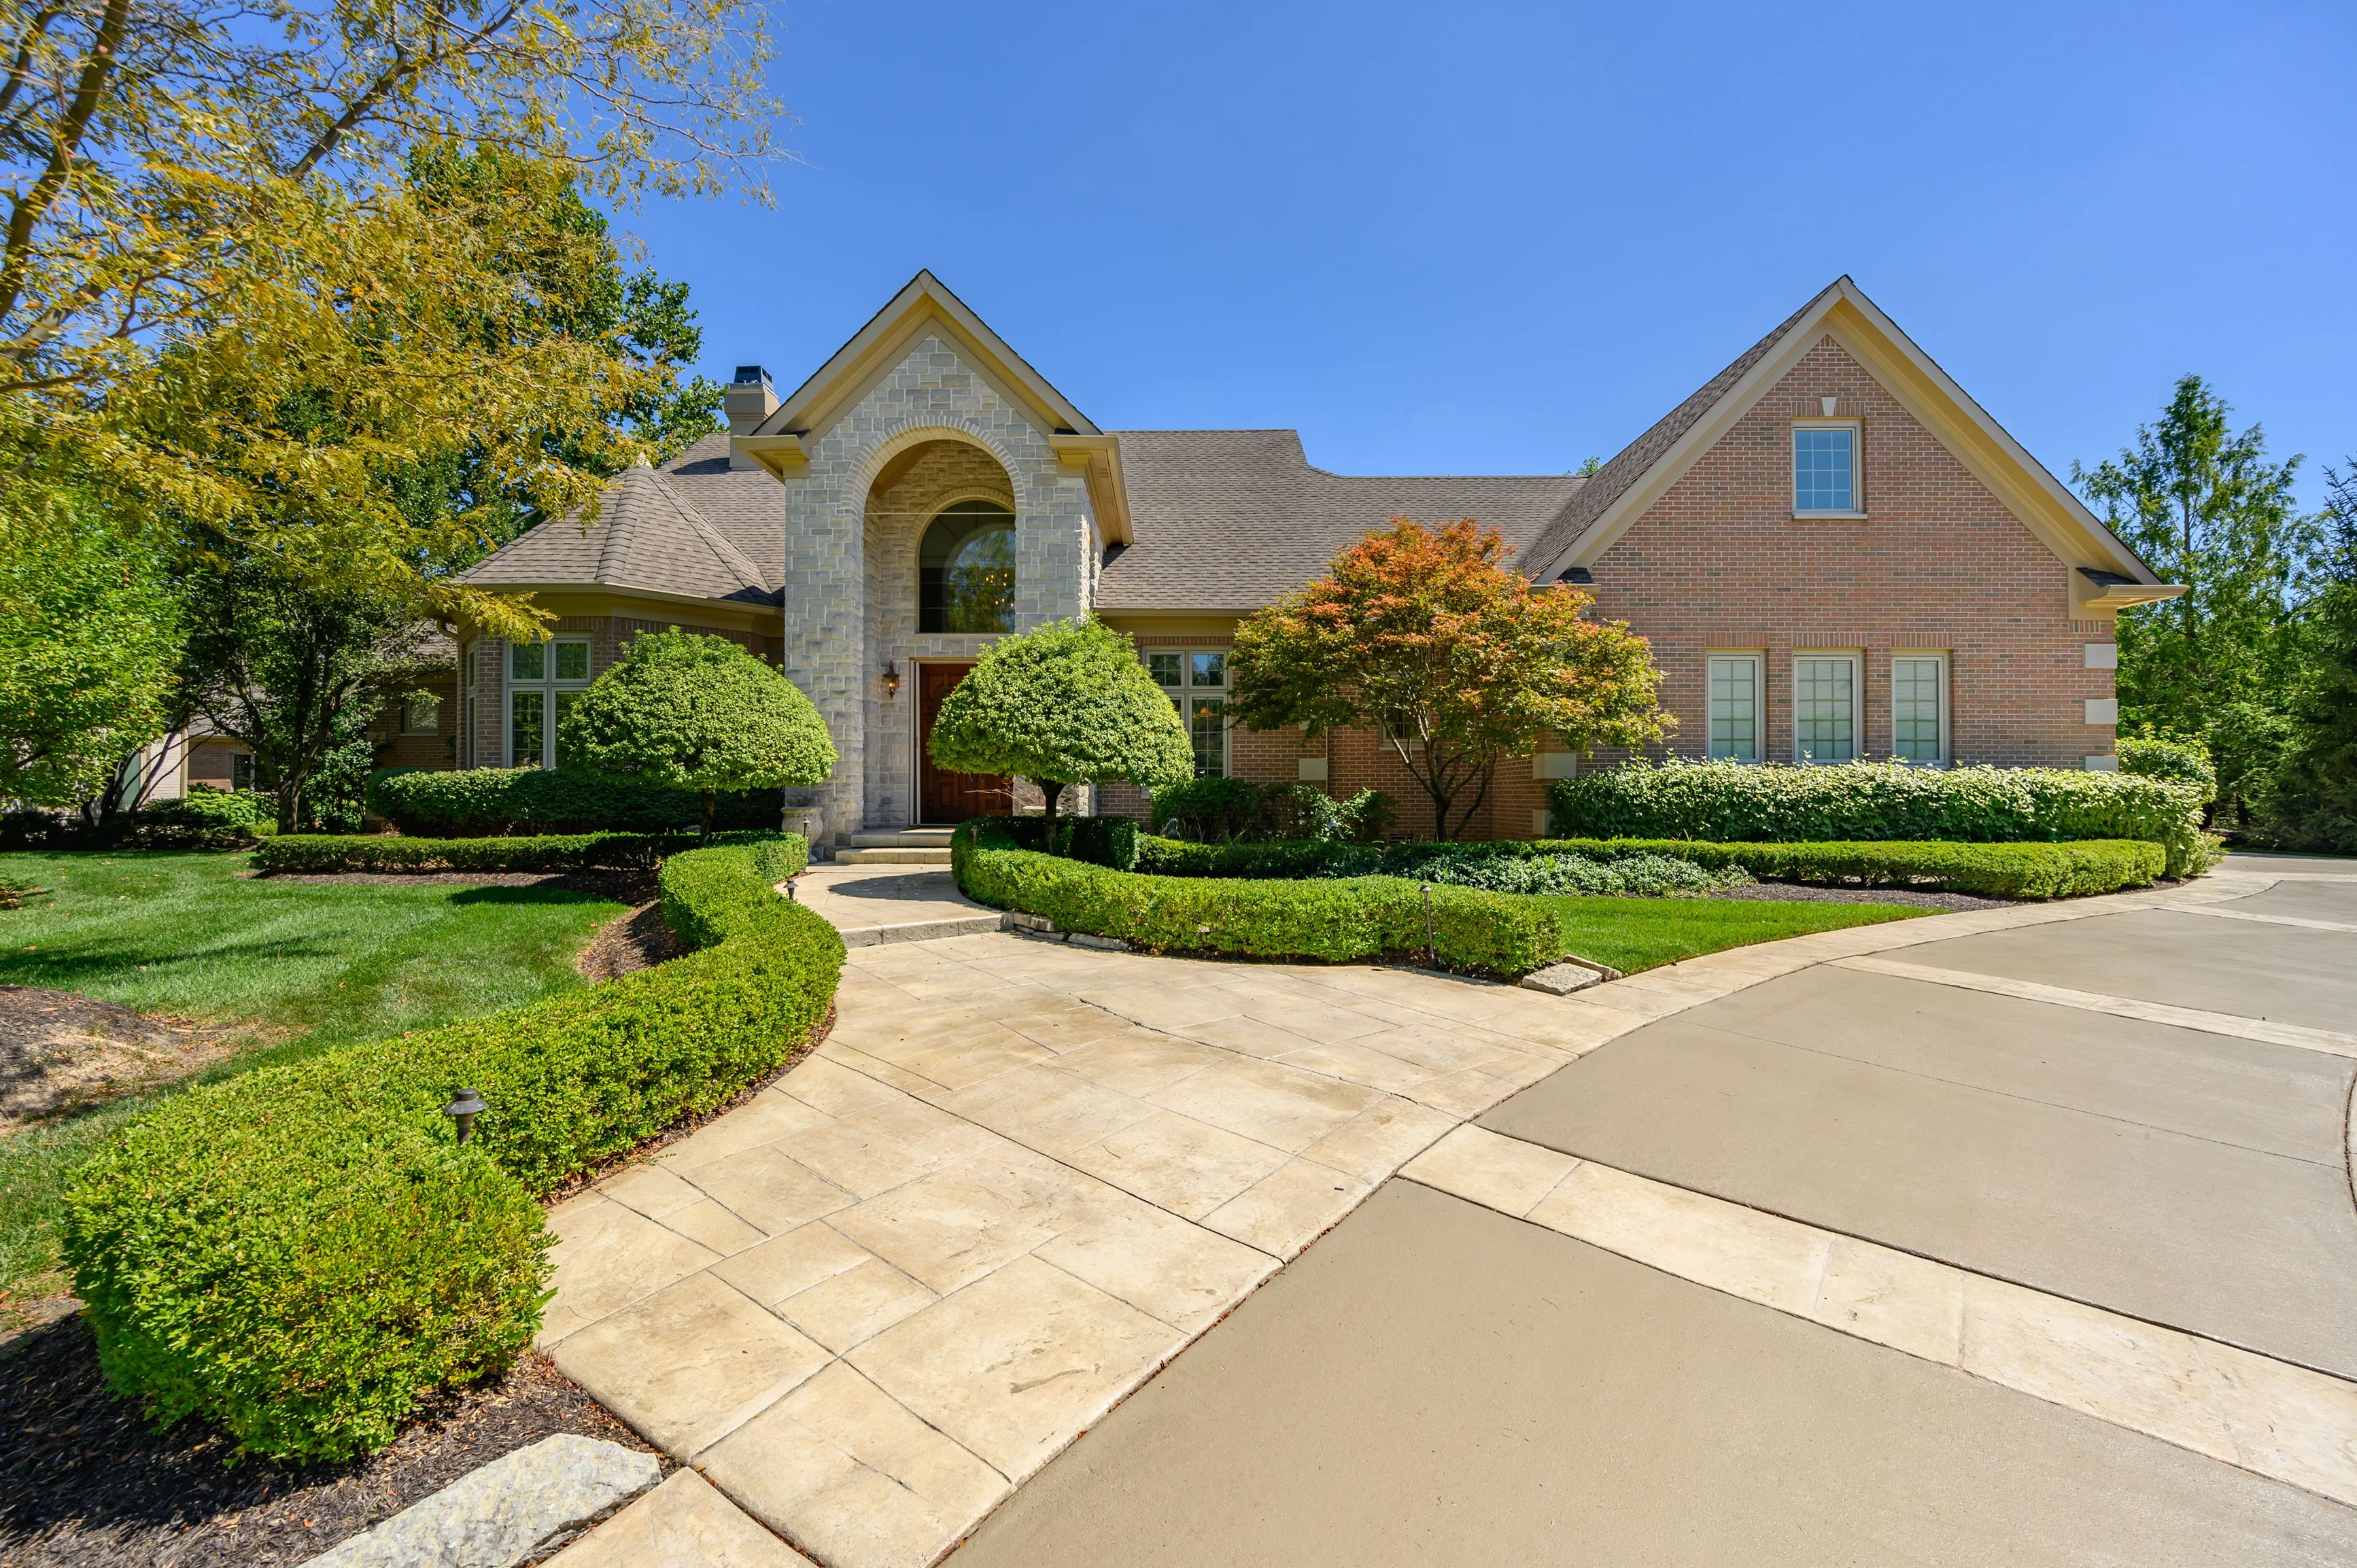 Elegant two-story brick house with an arched entryway, manicured landscaping, and a stone walkway under a clear blue sky.